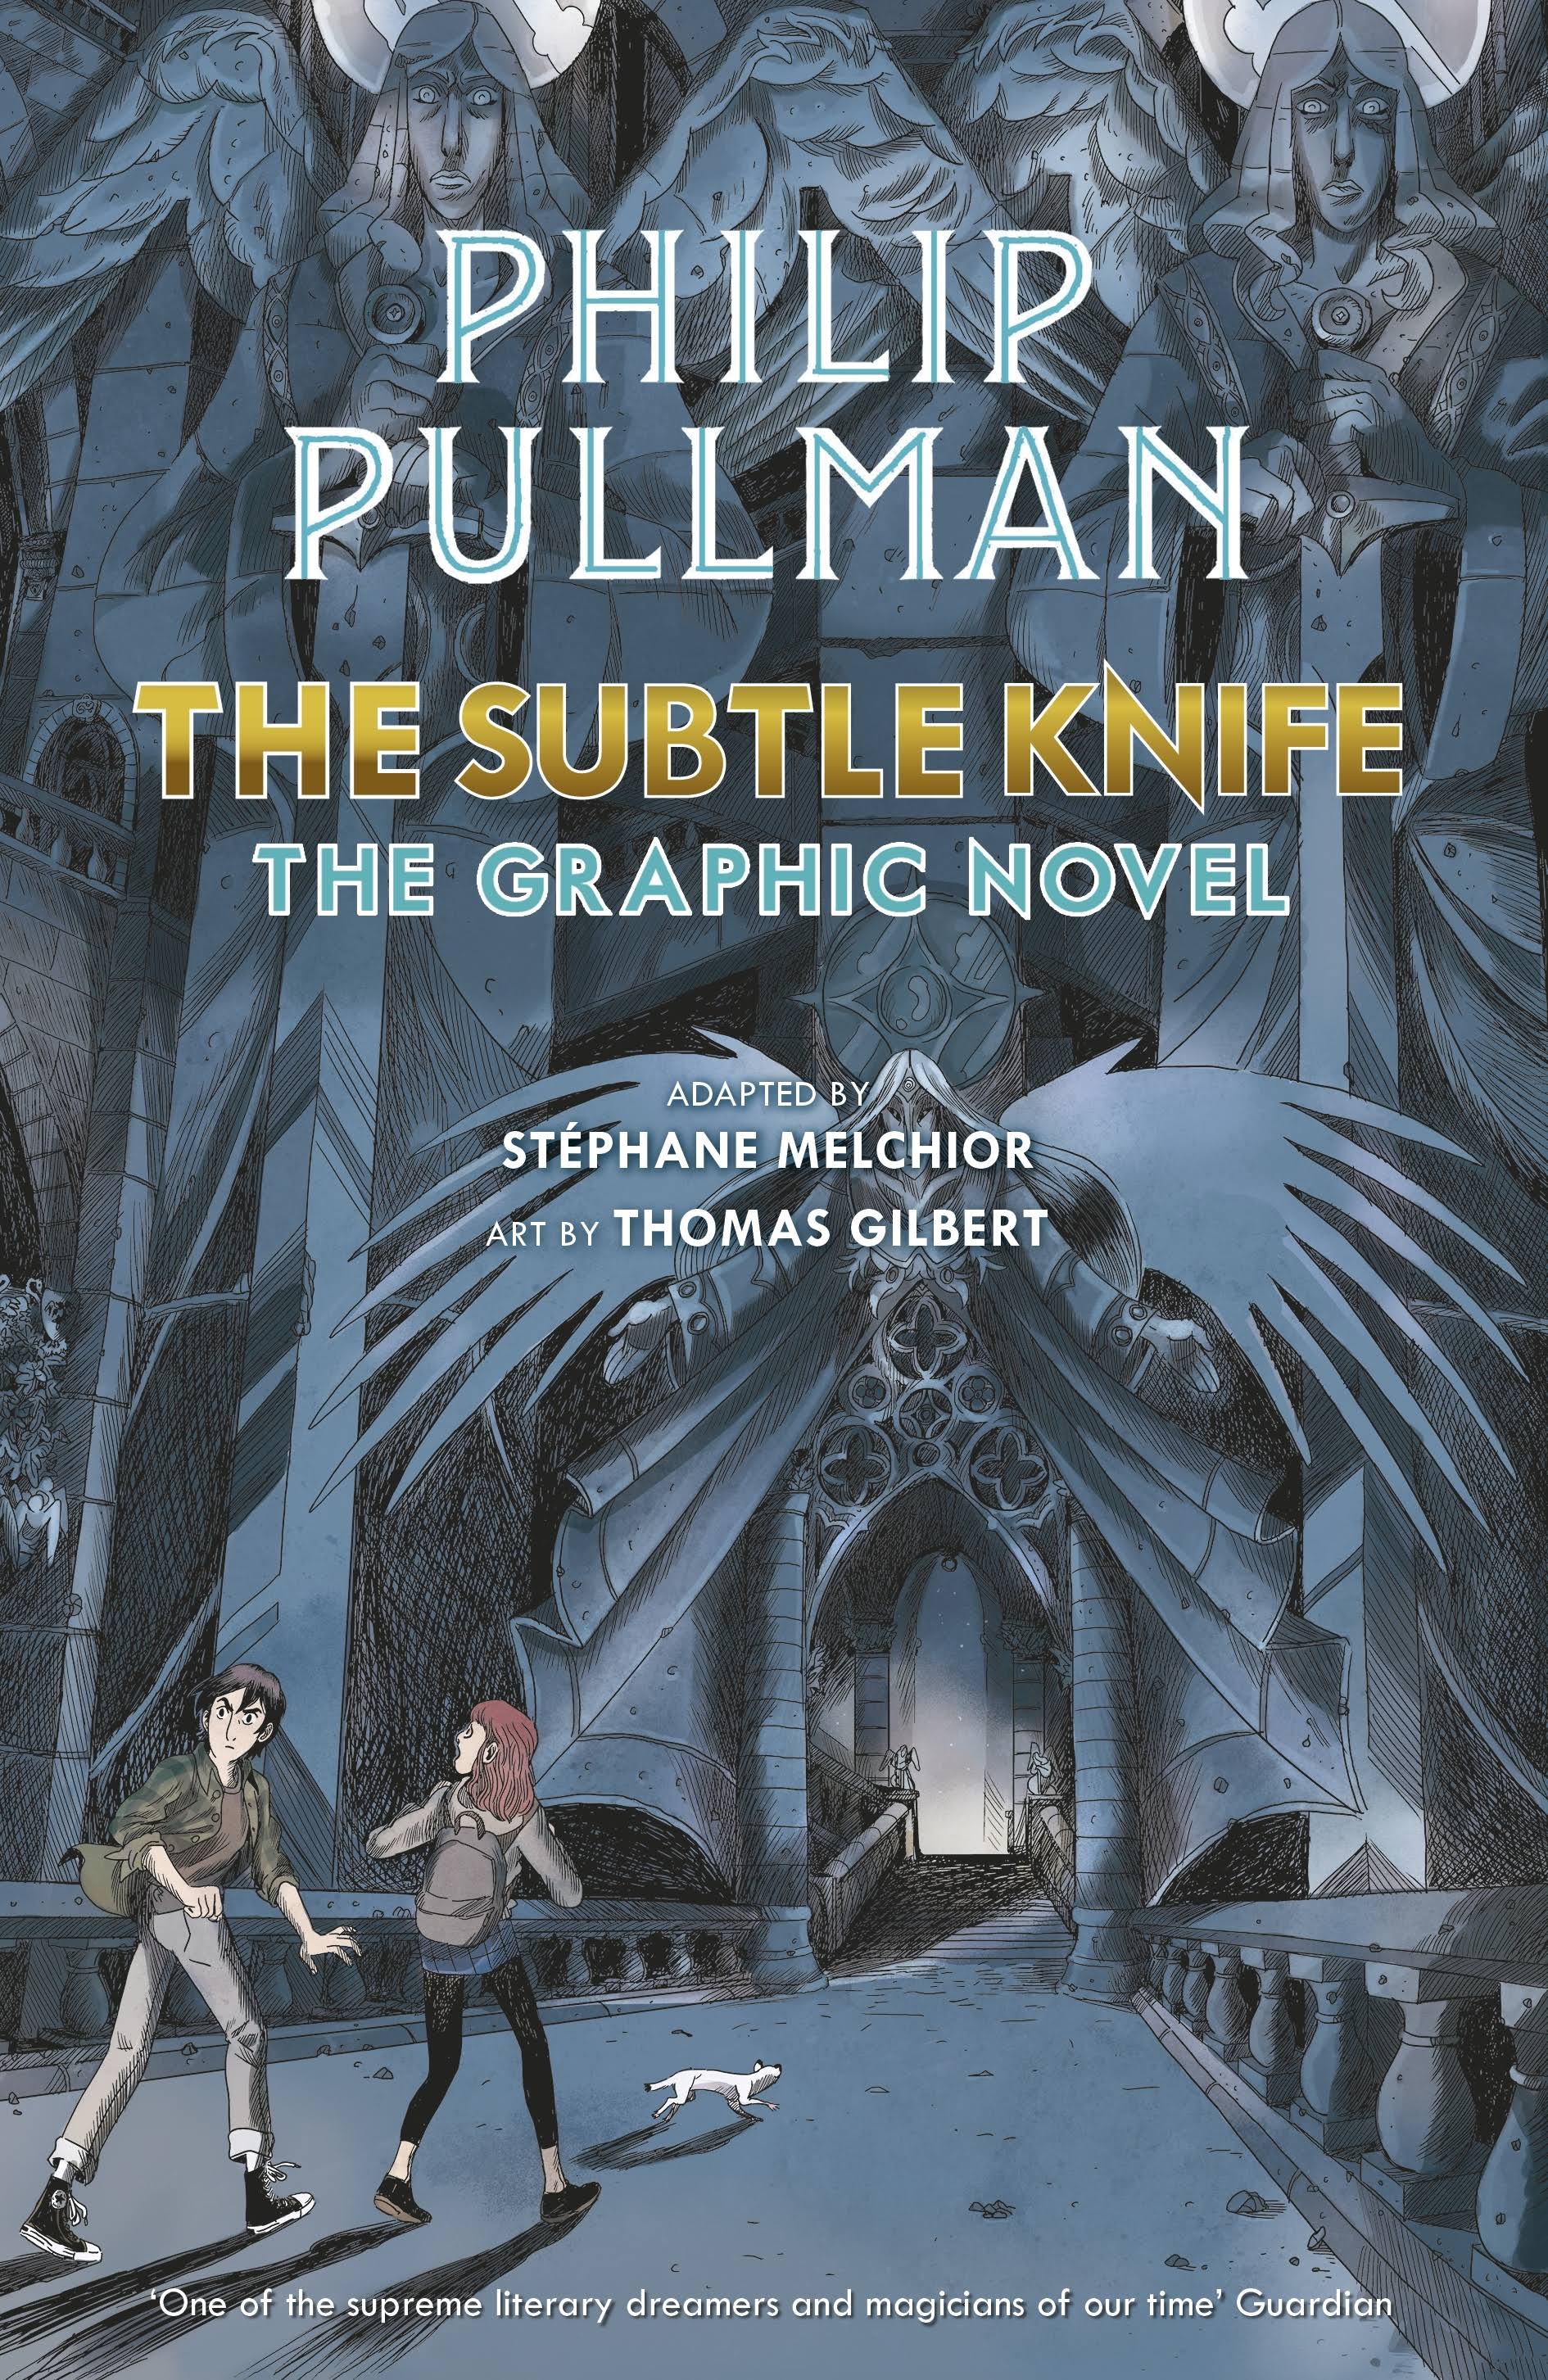 The Subtle Knife: The Graphic Novel by Stephane Melchior